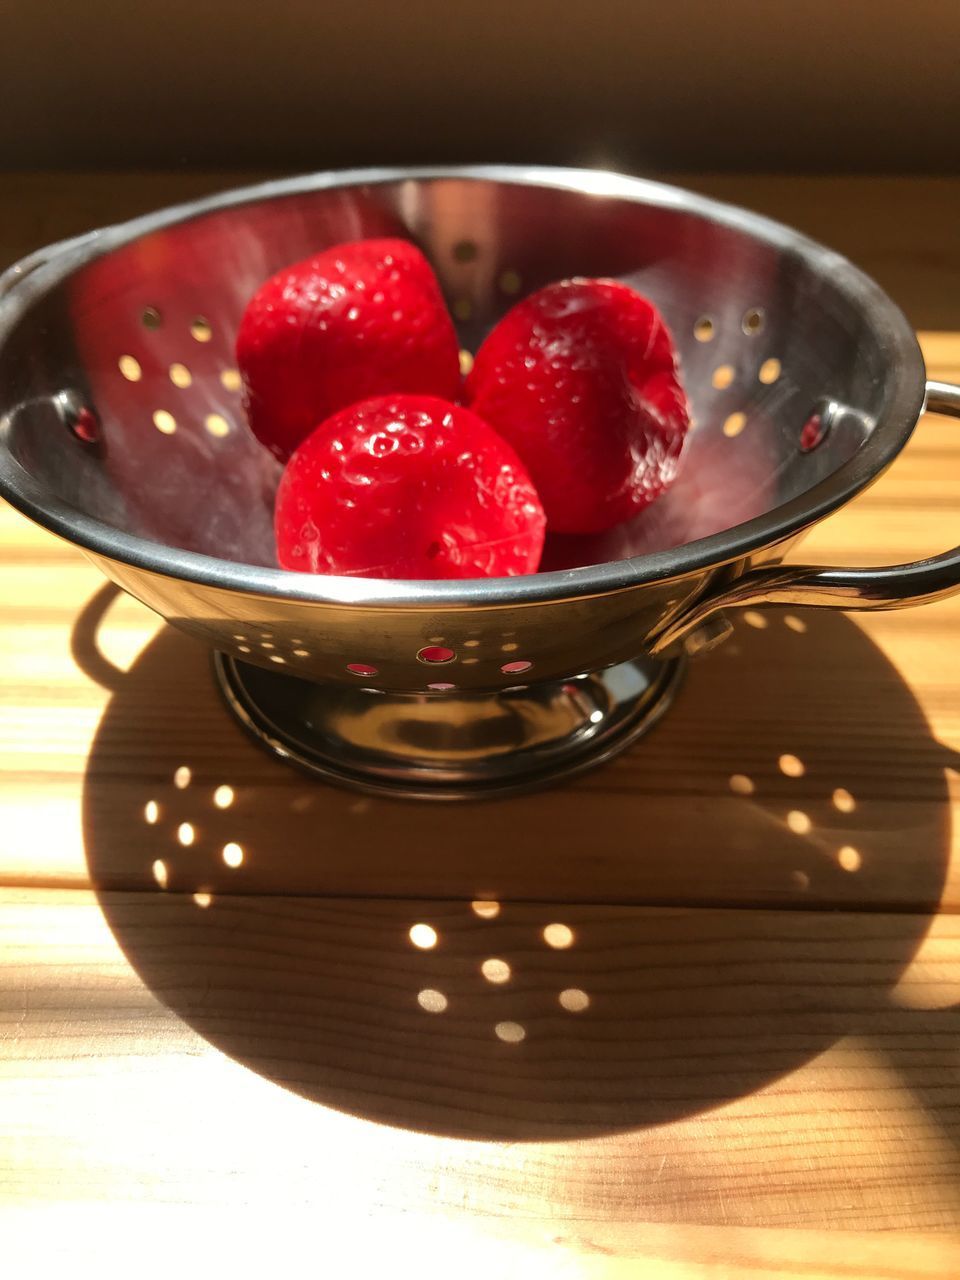 CLOSE-UP OF STRAWBERRIES IN PLATE ON TABLE